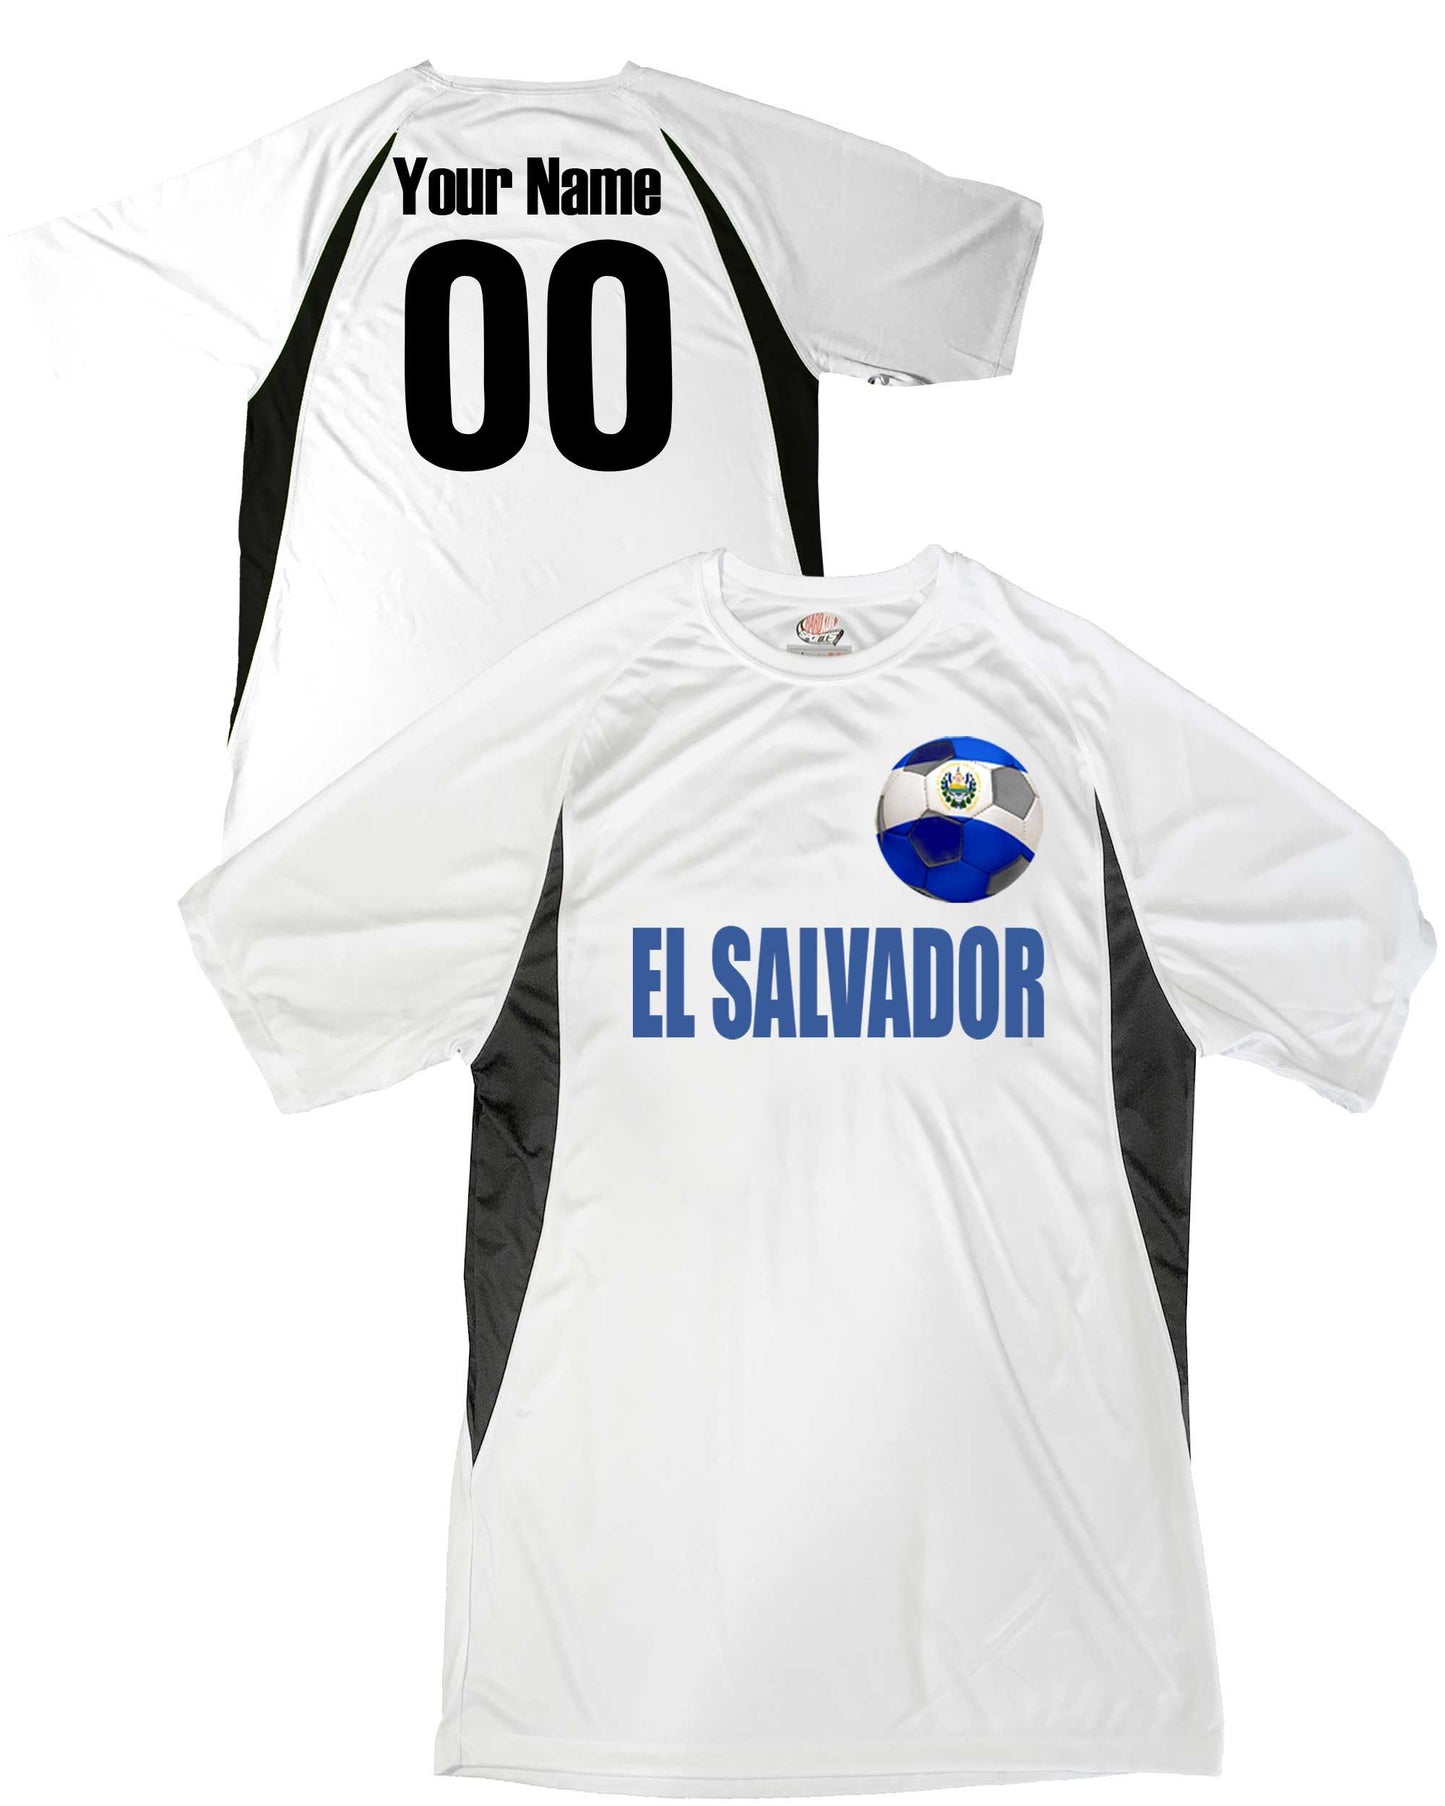 El Salvador Soccer Jersey El Salvadoran Shield Design Customized with Your Names and Numbers in Your choice of Popular Colors